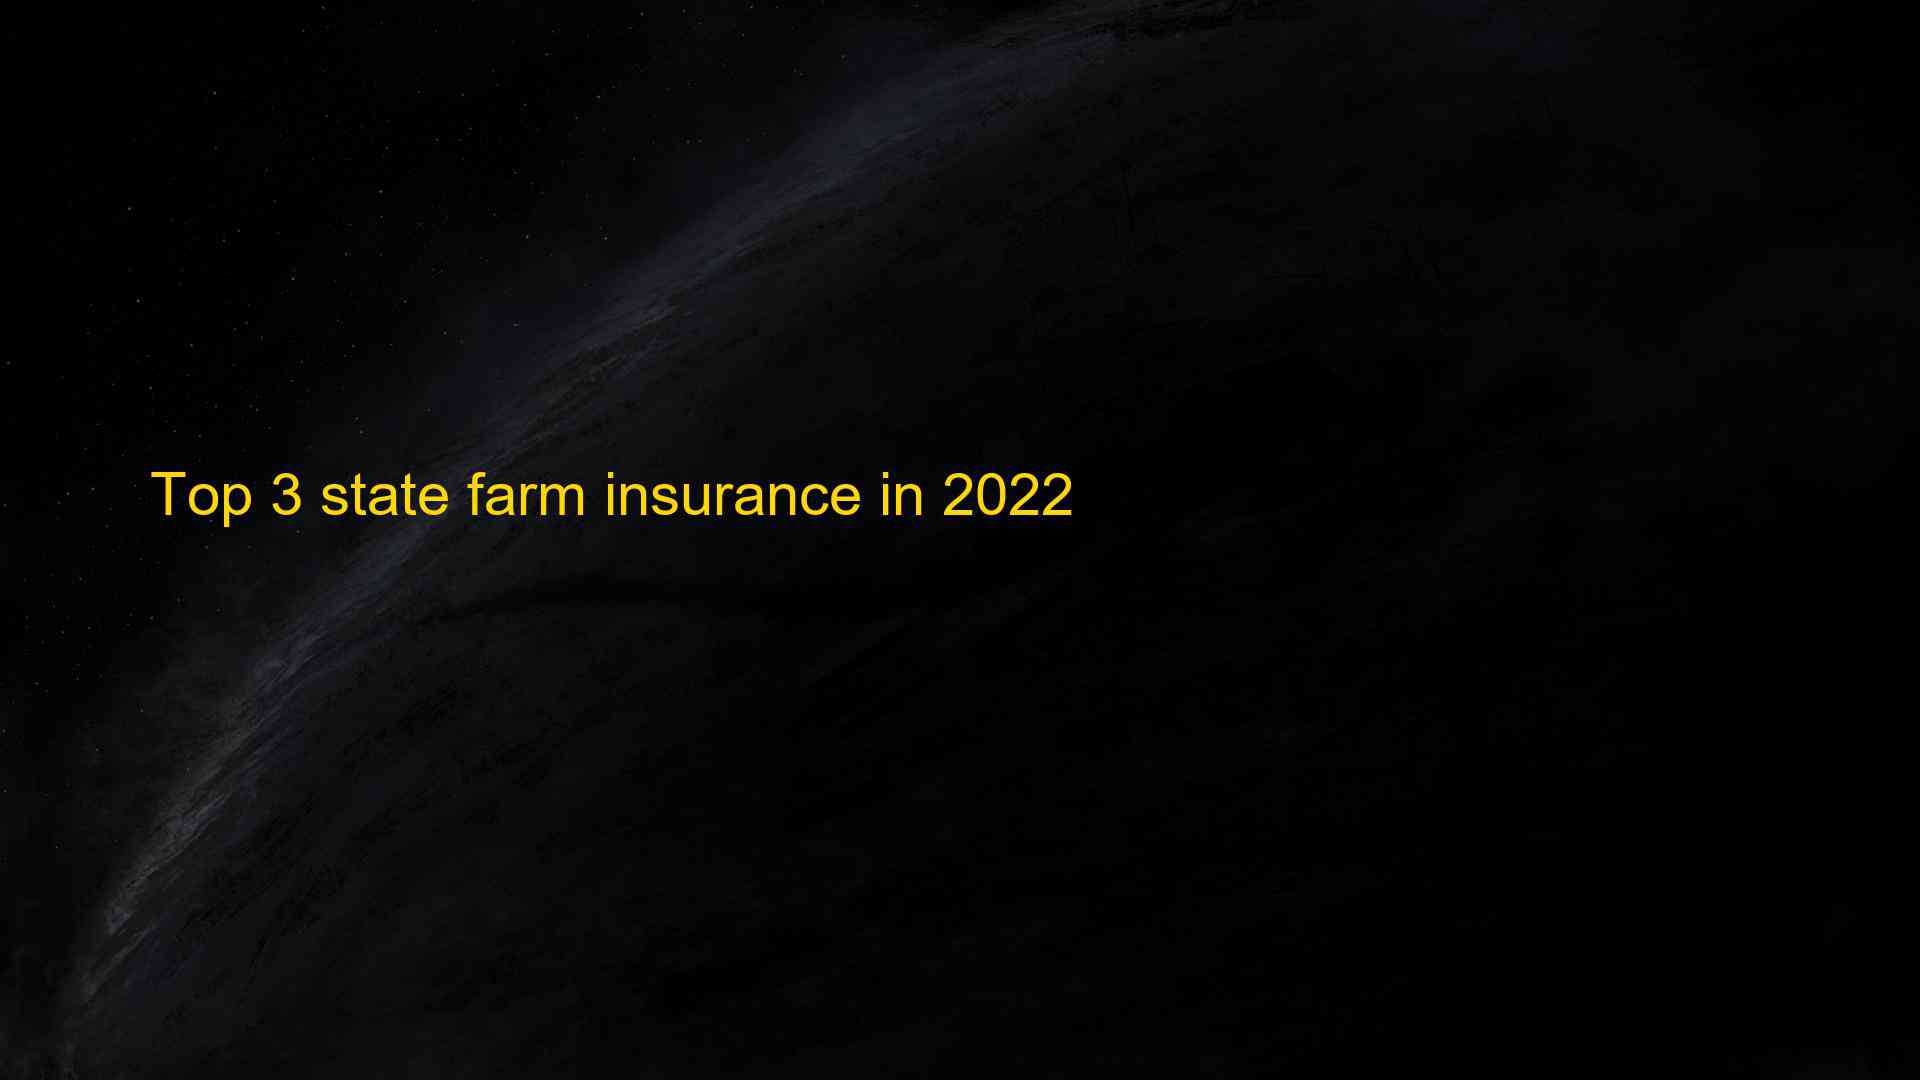 Top 3 state farm insurance in 2022 1660256877